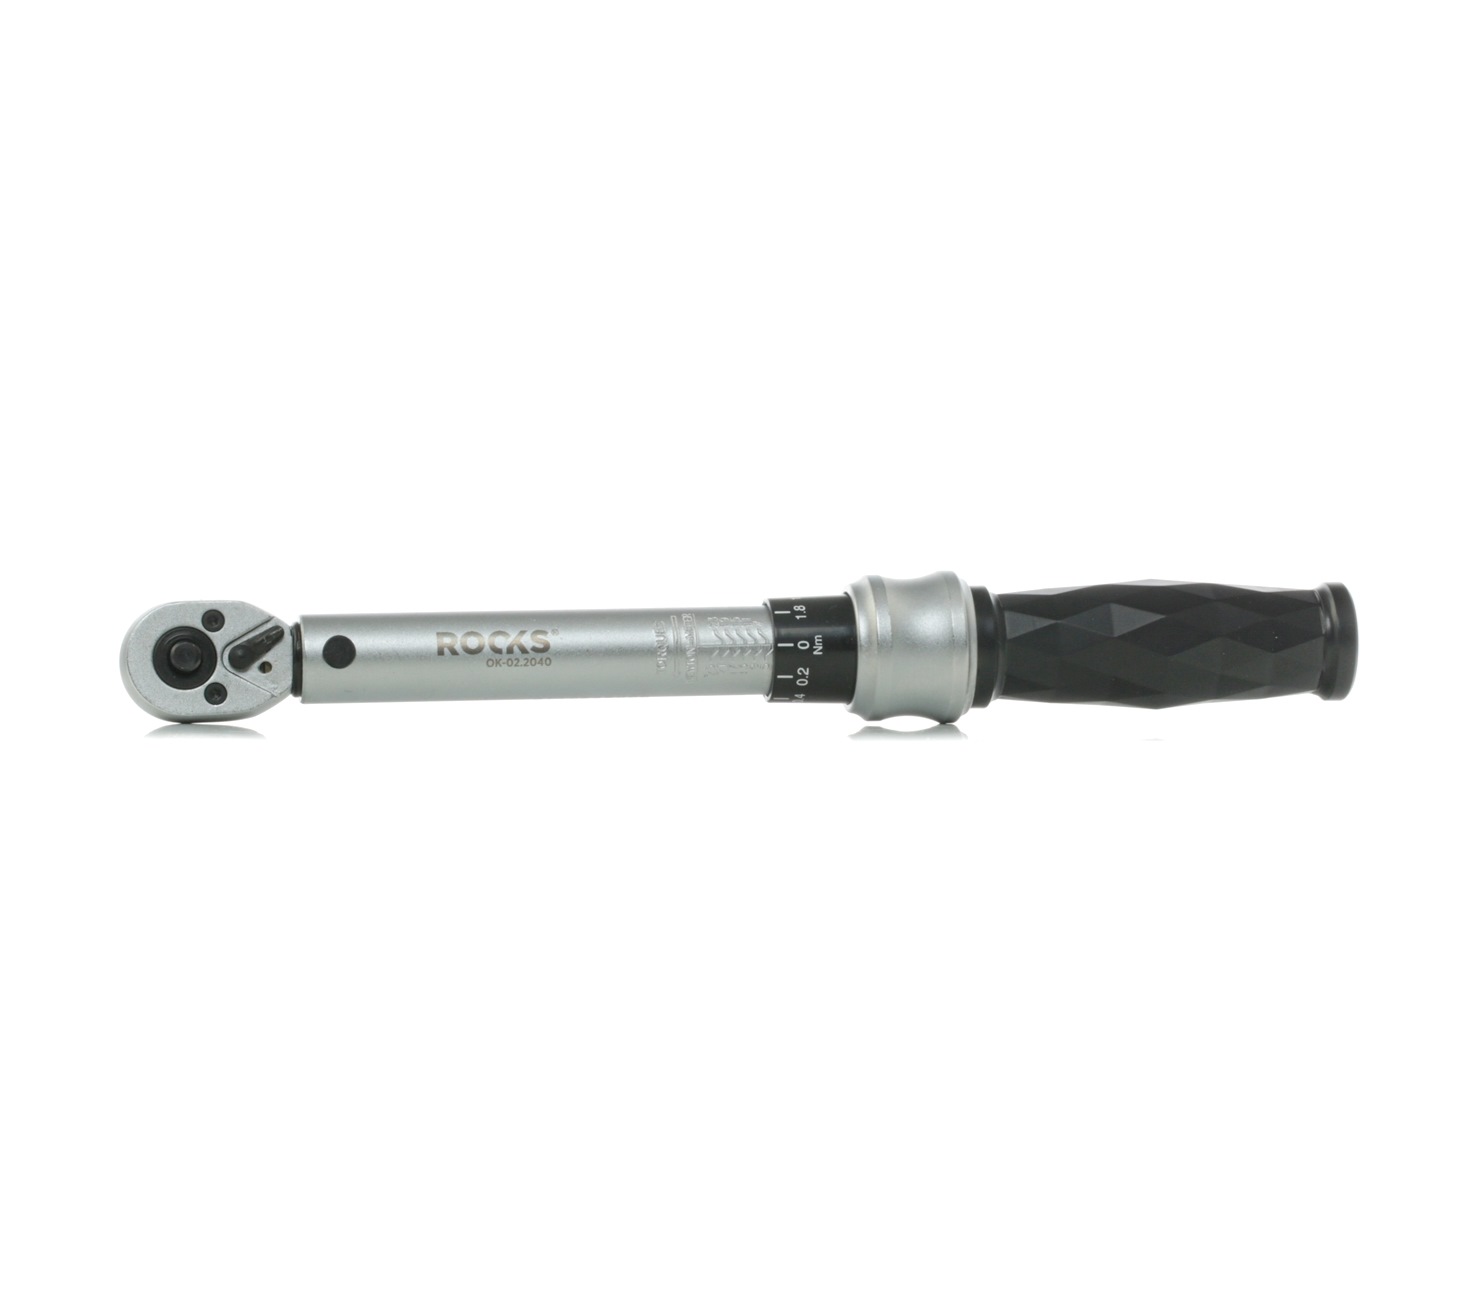 ROOKS Torque wrench  OK-02.2040 Torque spanner,Dynamometric wrench